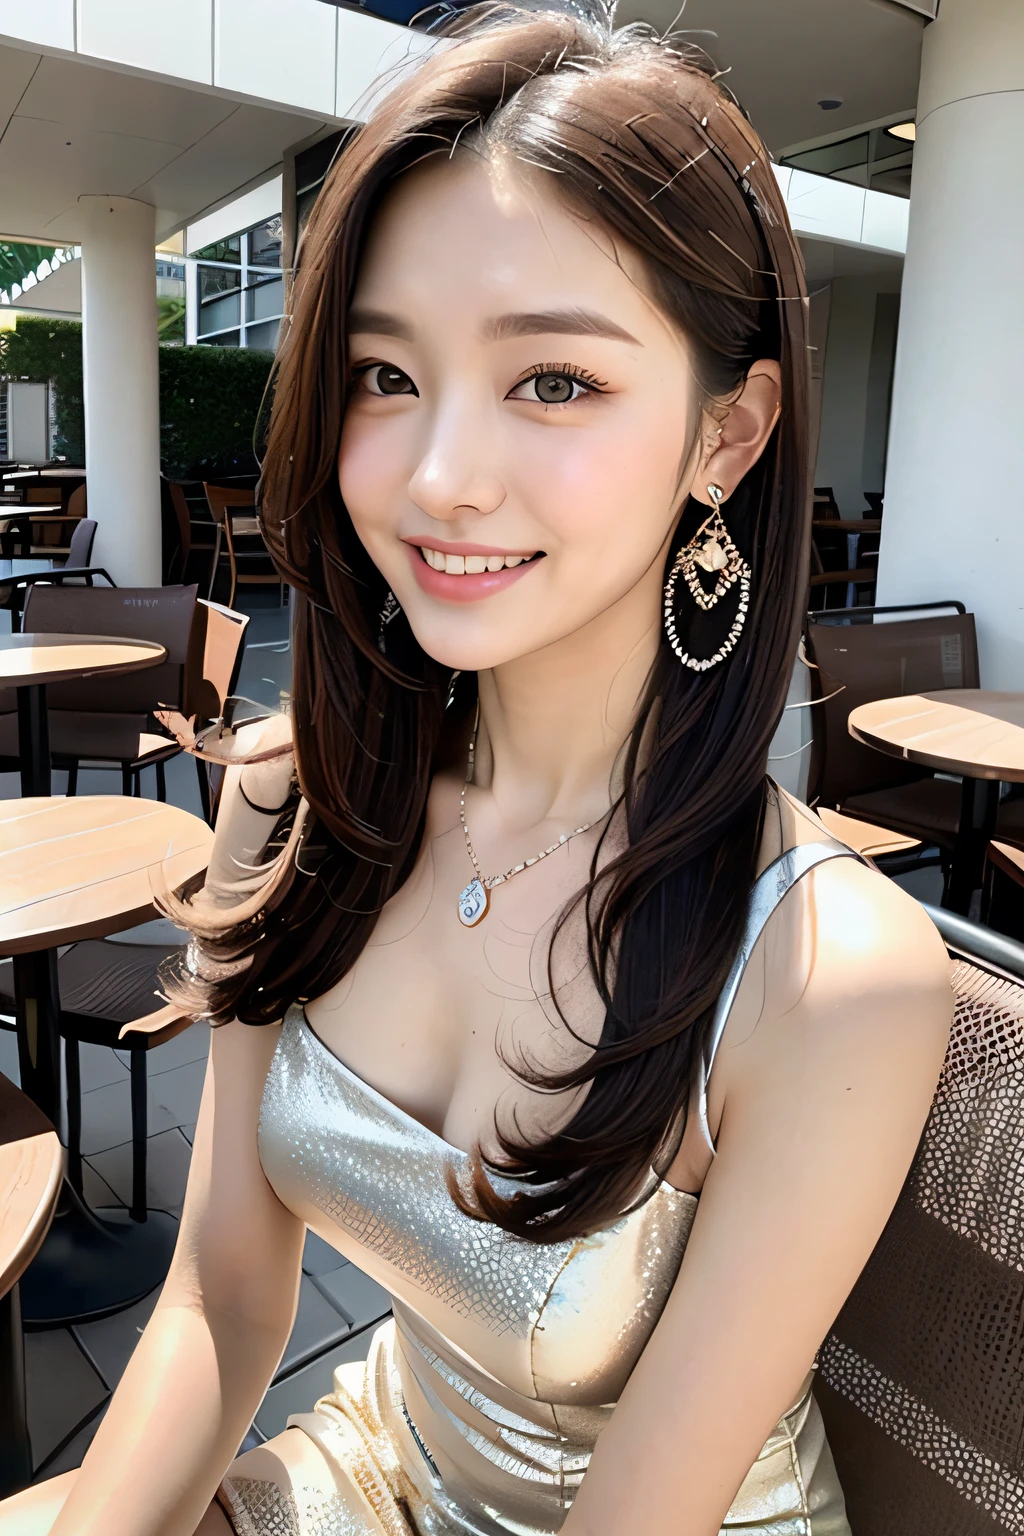 ((Innocent and cute girl: 1.3)), (focus on the face: 1.2), (Wearing a classy sleeveless Snowwhite dress: 1.3), (Snowwhite:1.2), ((Affectionate smile: 1.2)), Layered hairstyle, Brown hair, Medium Long Hair, medium large breasts, 
BREAK, 
(Full body shot: 1.2), looking at the viewer, (sitting opposite each other on the seats: 1.2), (In the outdoor stylish cafe), from below, 
BREAK, 
(Masterpiece: 1.3), Maximum resolution, Ultra HDTV, Cinema Light, Ultra HDTV, (Detailed eyes and skin), (Detailed facial features), HDR, 8k resolution, Sharp Focus: 1.2, Perfect style, Beautiful face, Highly detailed face and skin texture, Detailed eyes, Double eyelids, Thin eyebrows, Glitter Eyeliner: 1.2, Natural cheeks, shiny skin, fair skin: 1.2, shiny small neckless and earrings, (shiny lips: 1.4),